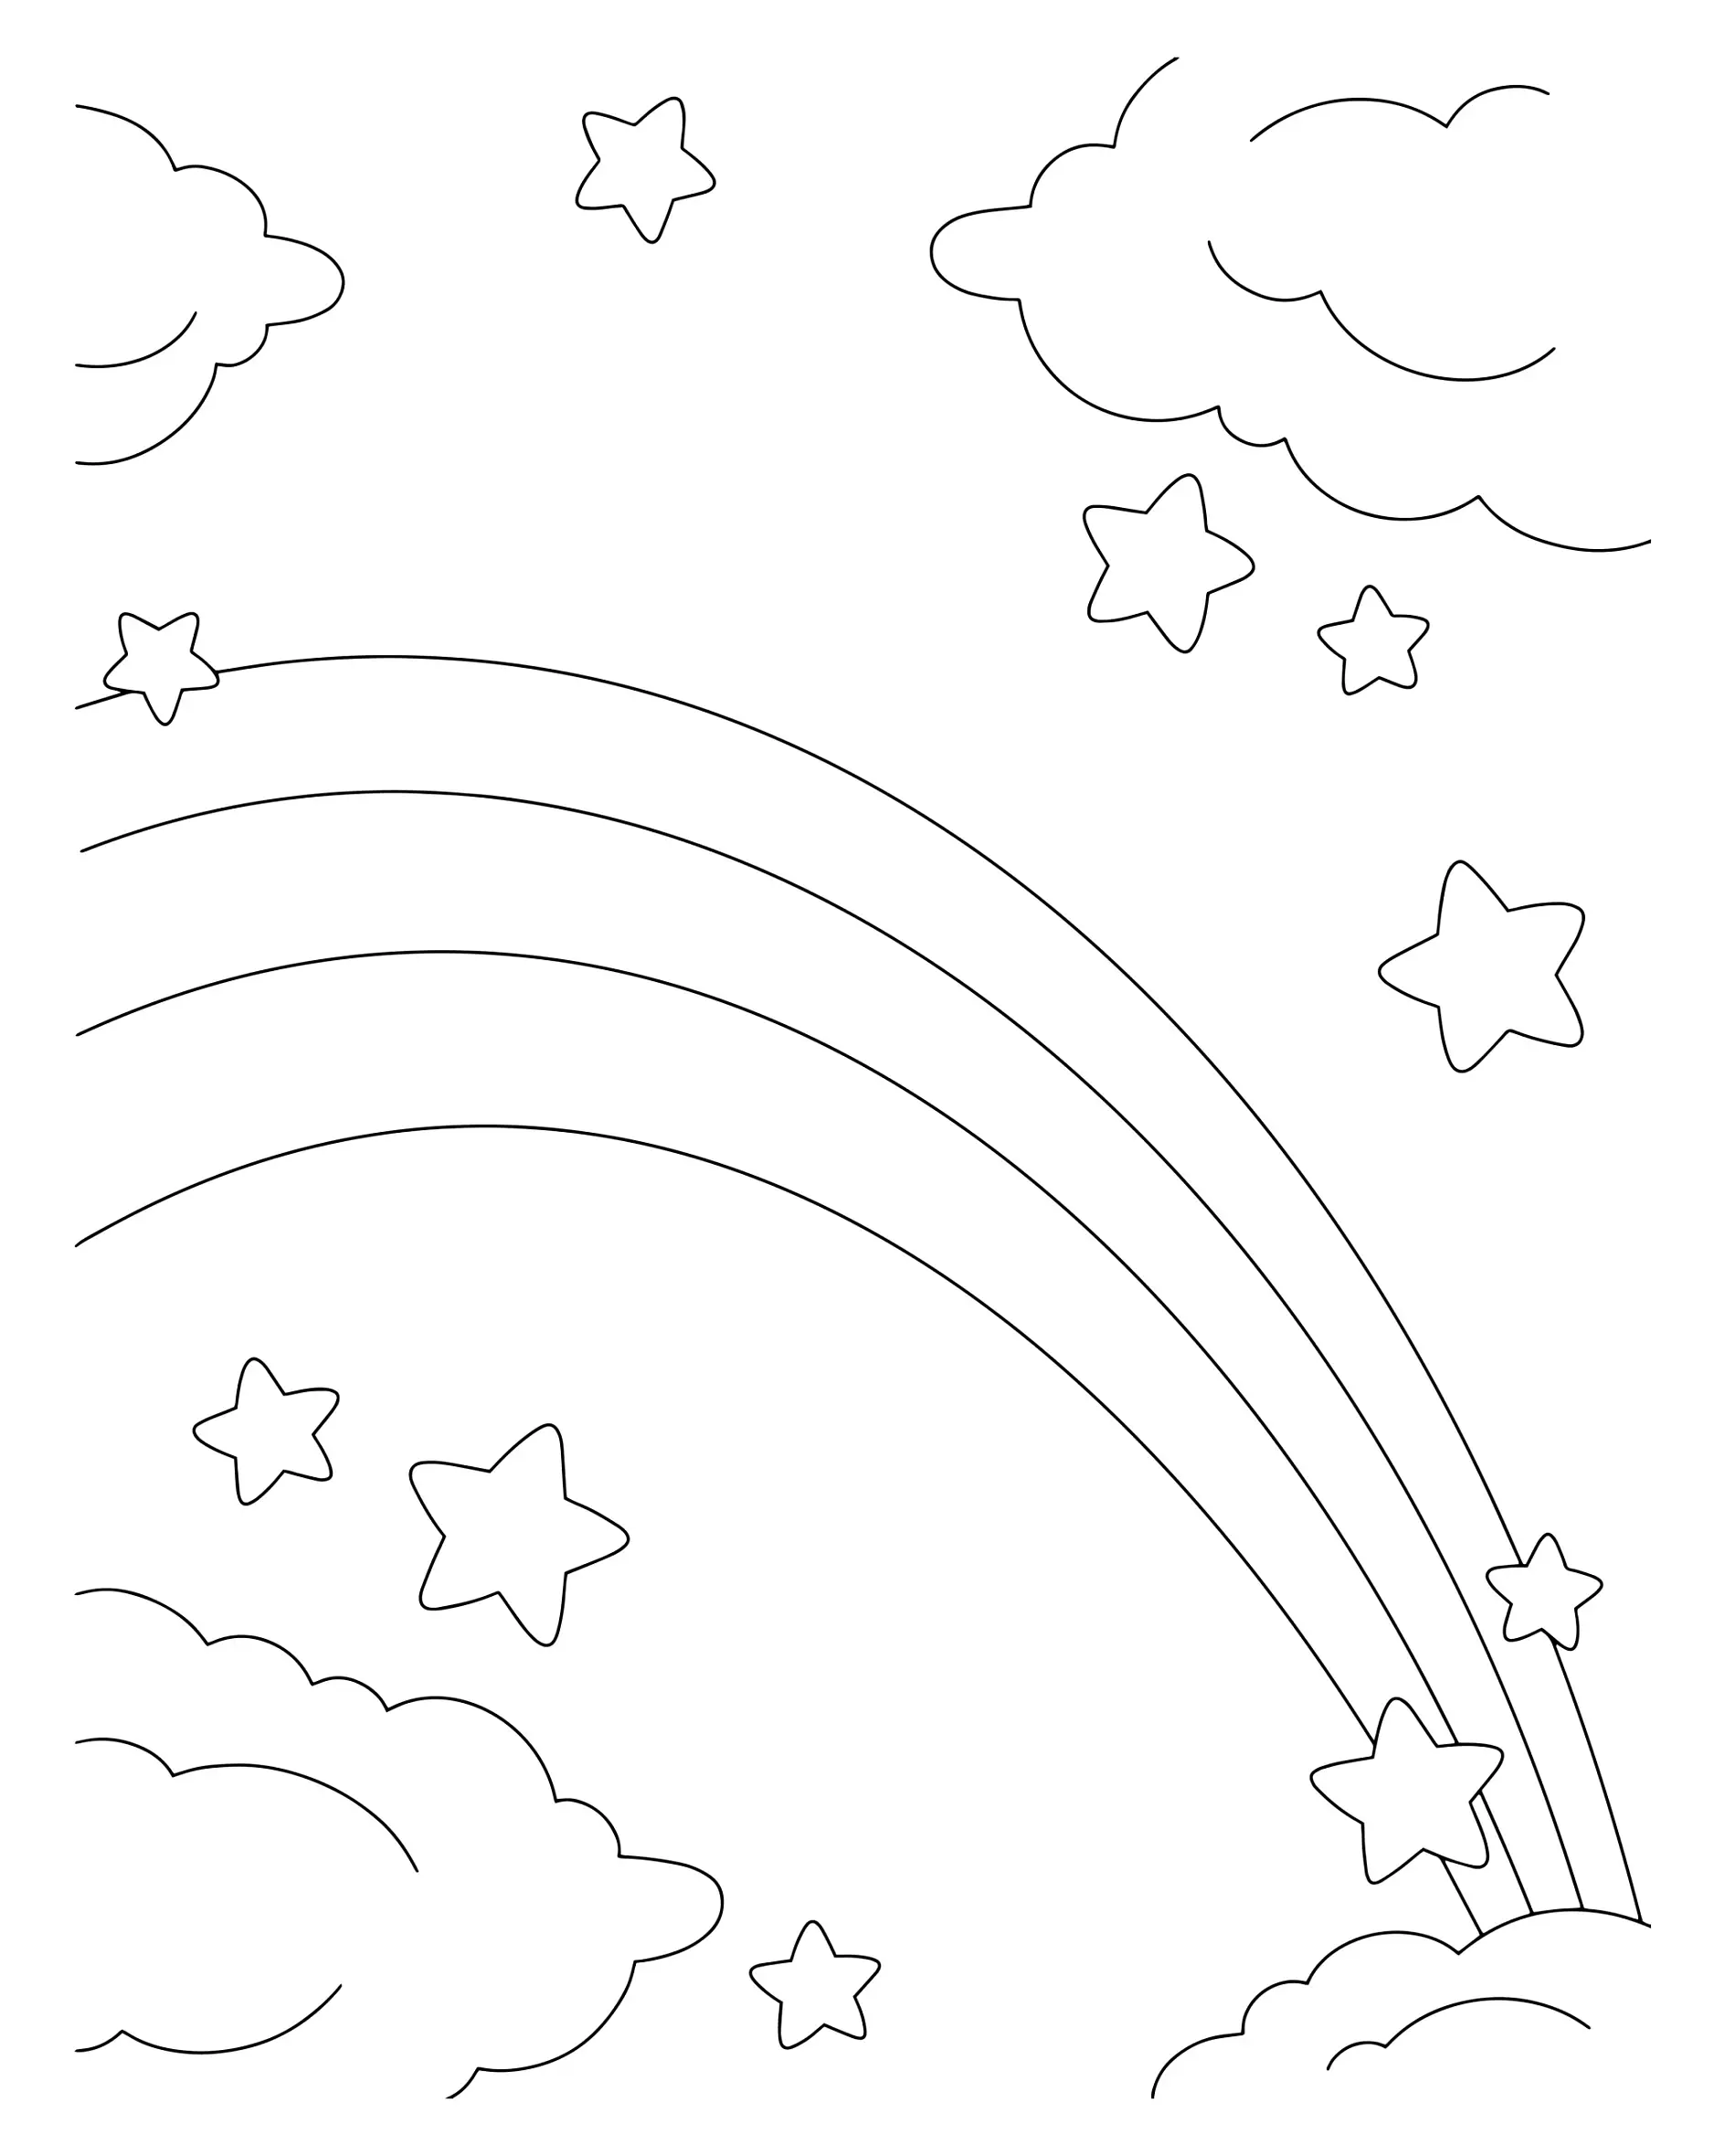 Scene with rainbow, cloud and stars. Coloring book page for kids. Cartoon style character. Vector illustration isolated on white background.